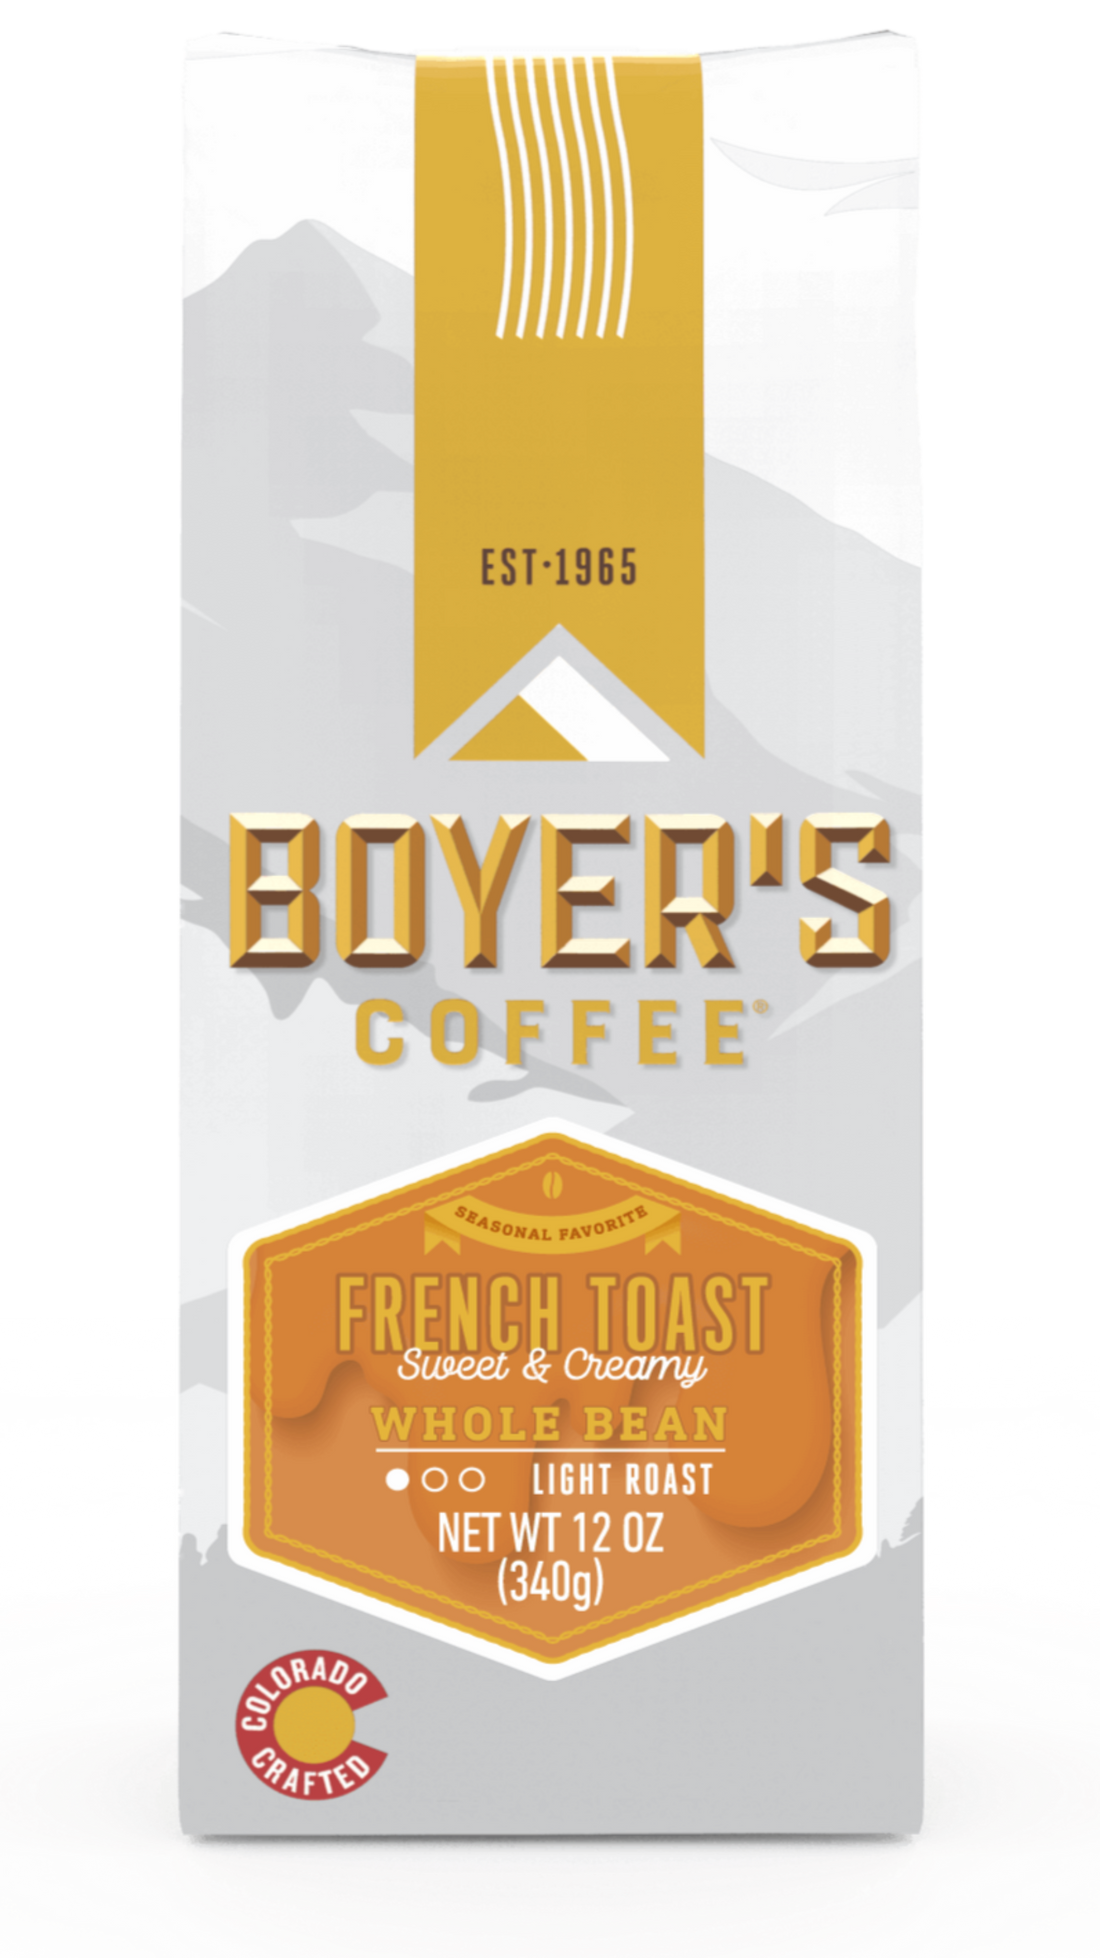 NEW! French Toast Coffee